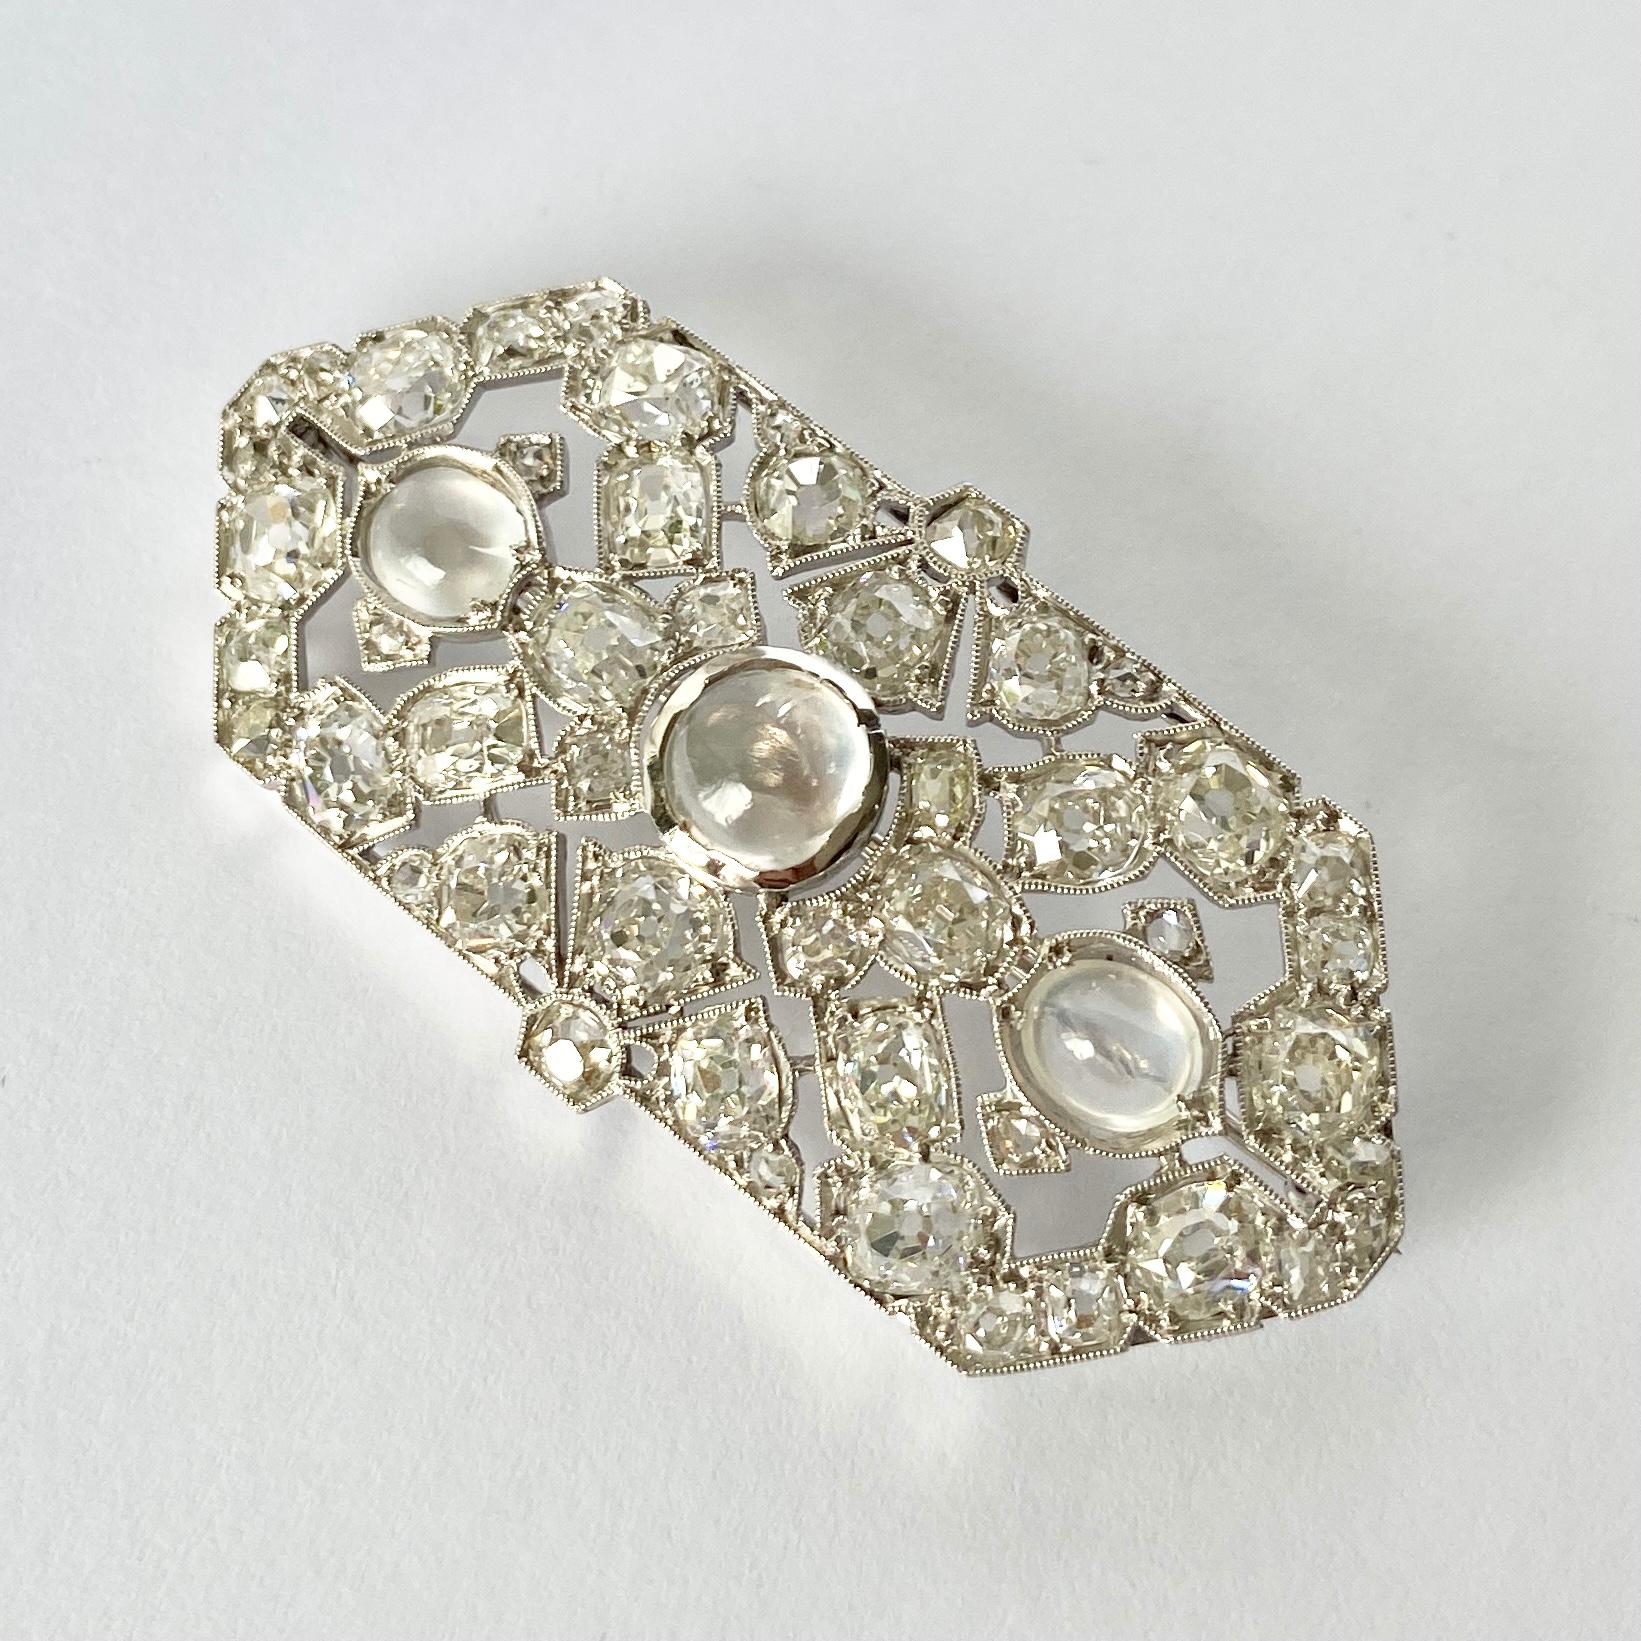 This piece is a sure show stopper! This brooch holds a total of 5.1carats of bright shimmering old mine cut diamonds. Sat at the centre are three moonstones which compliment the diamonds perfectly. Modelled in Platinum.

Brooch Dimensions: